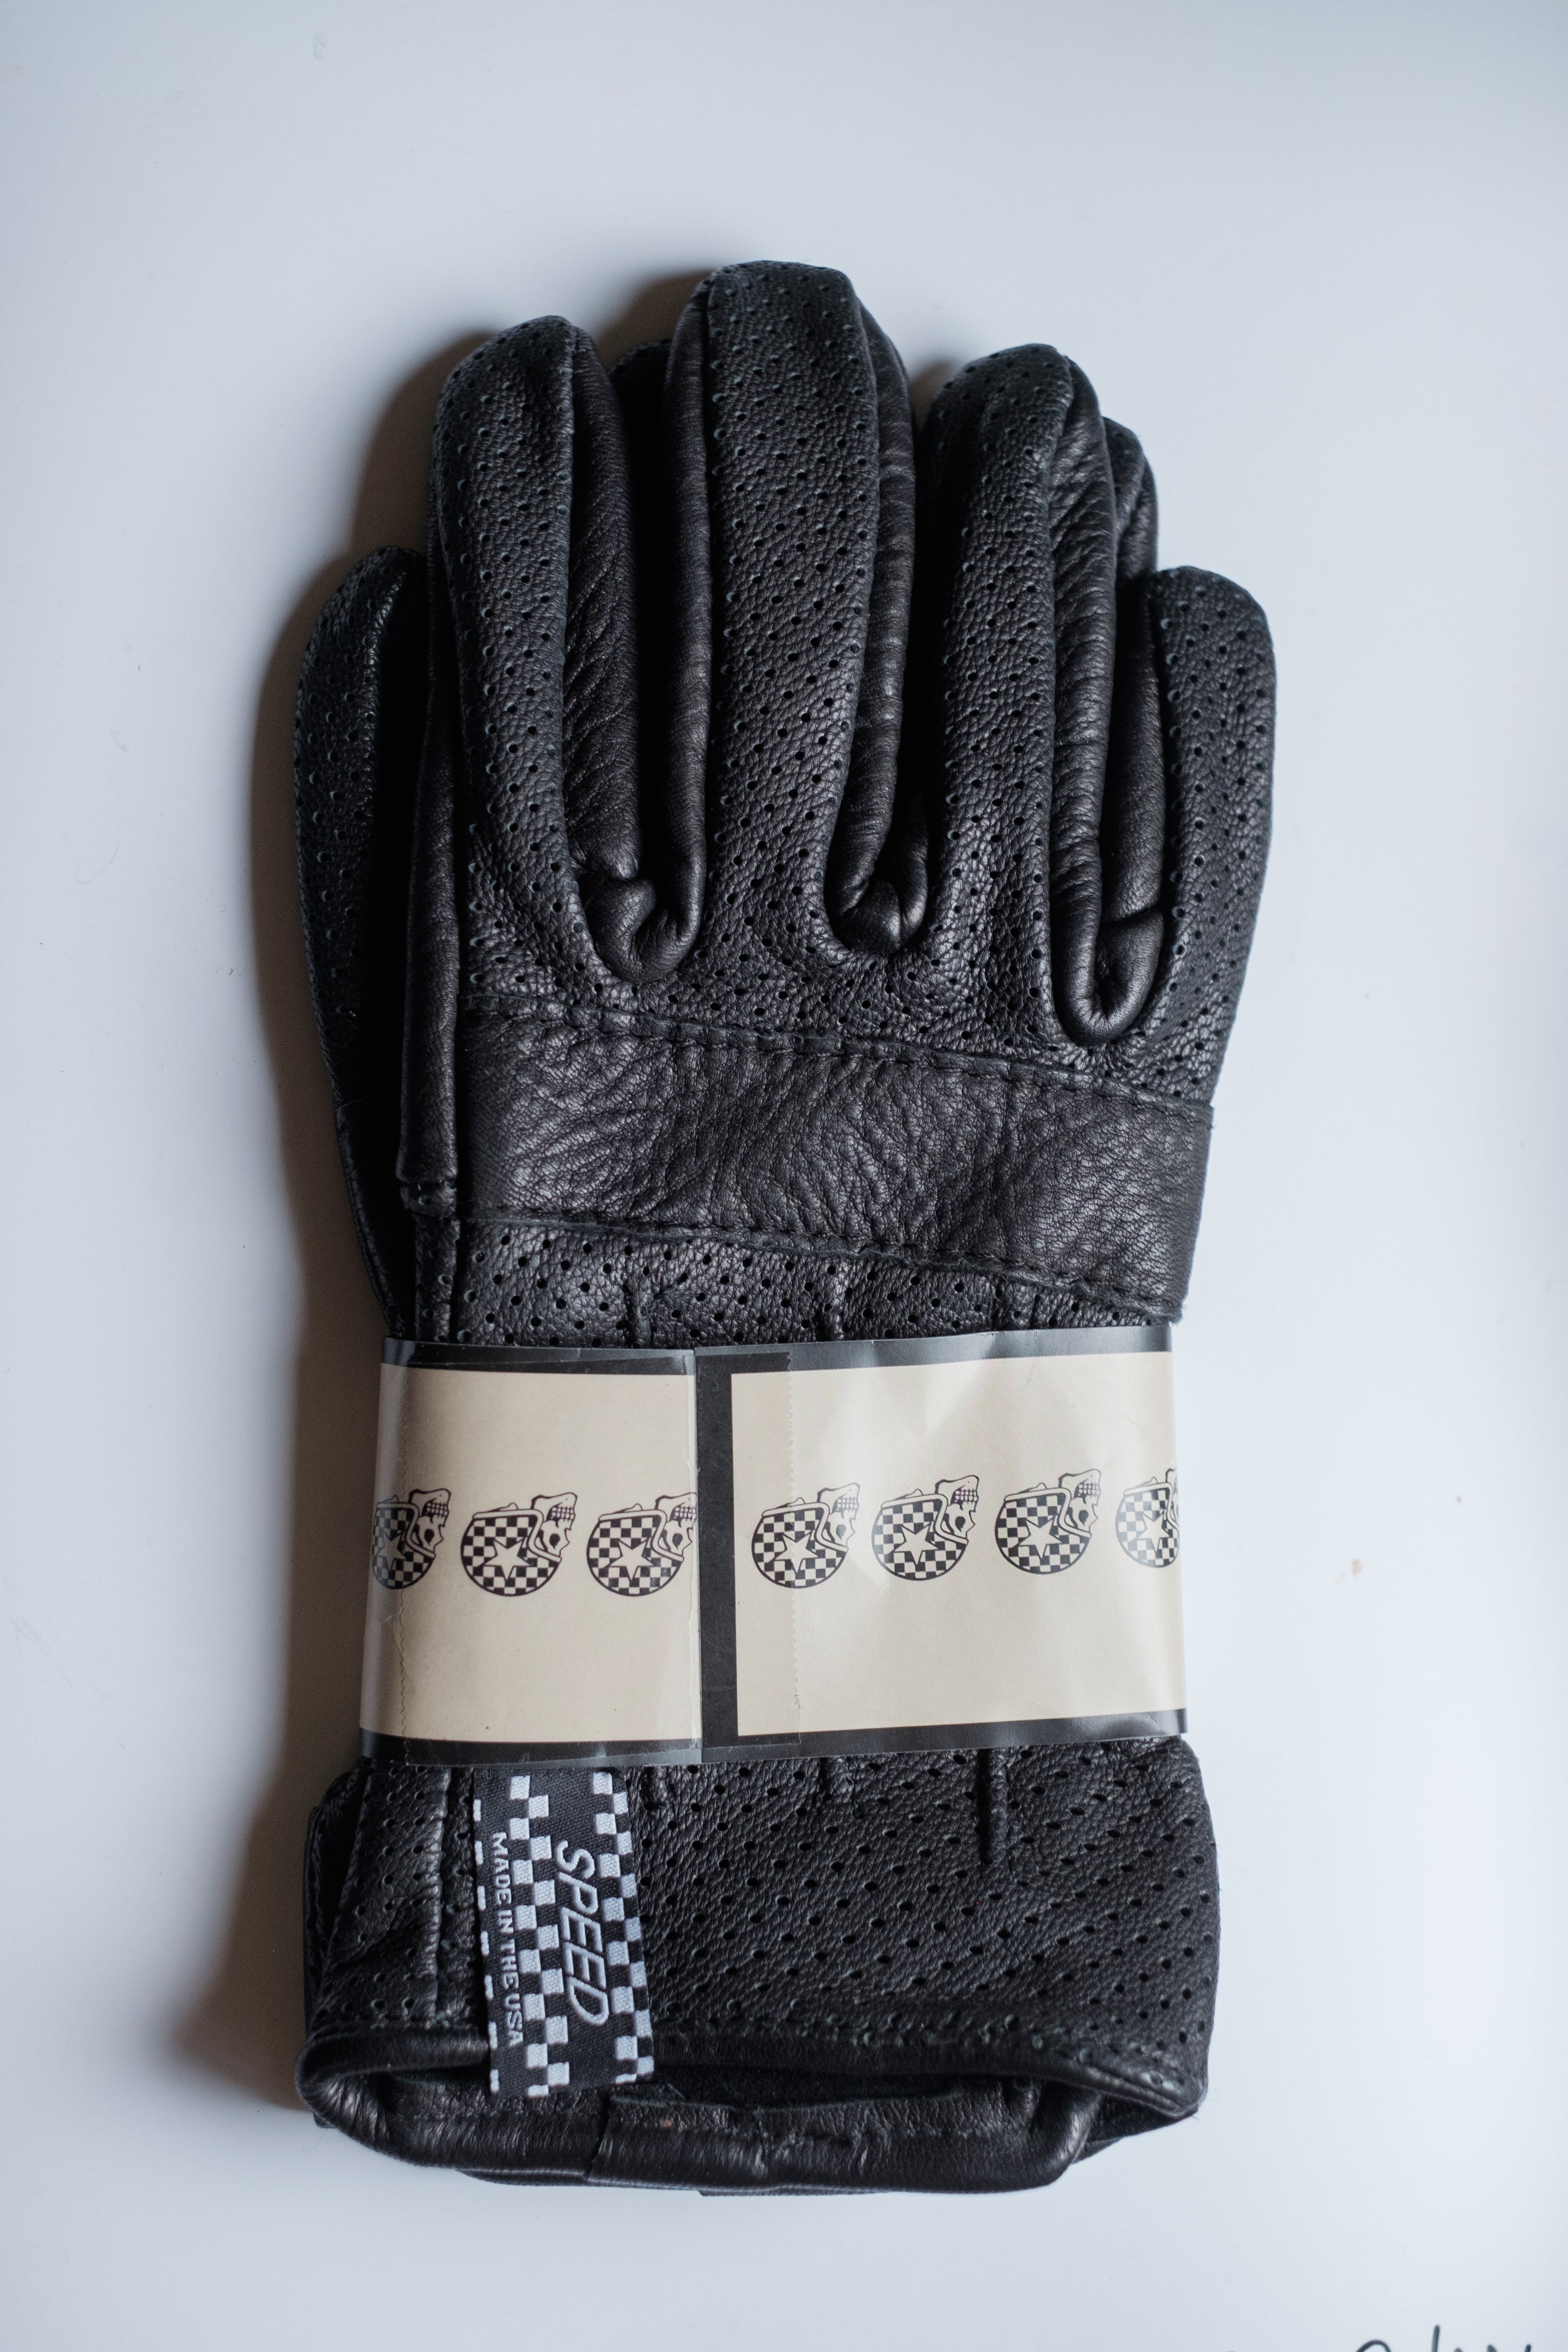 Speed California Gloves "Motorcycle Gloves"